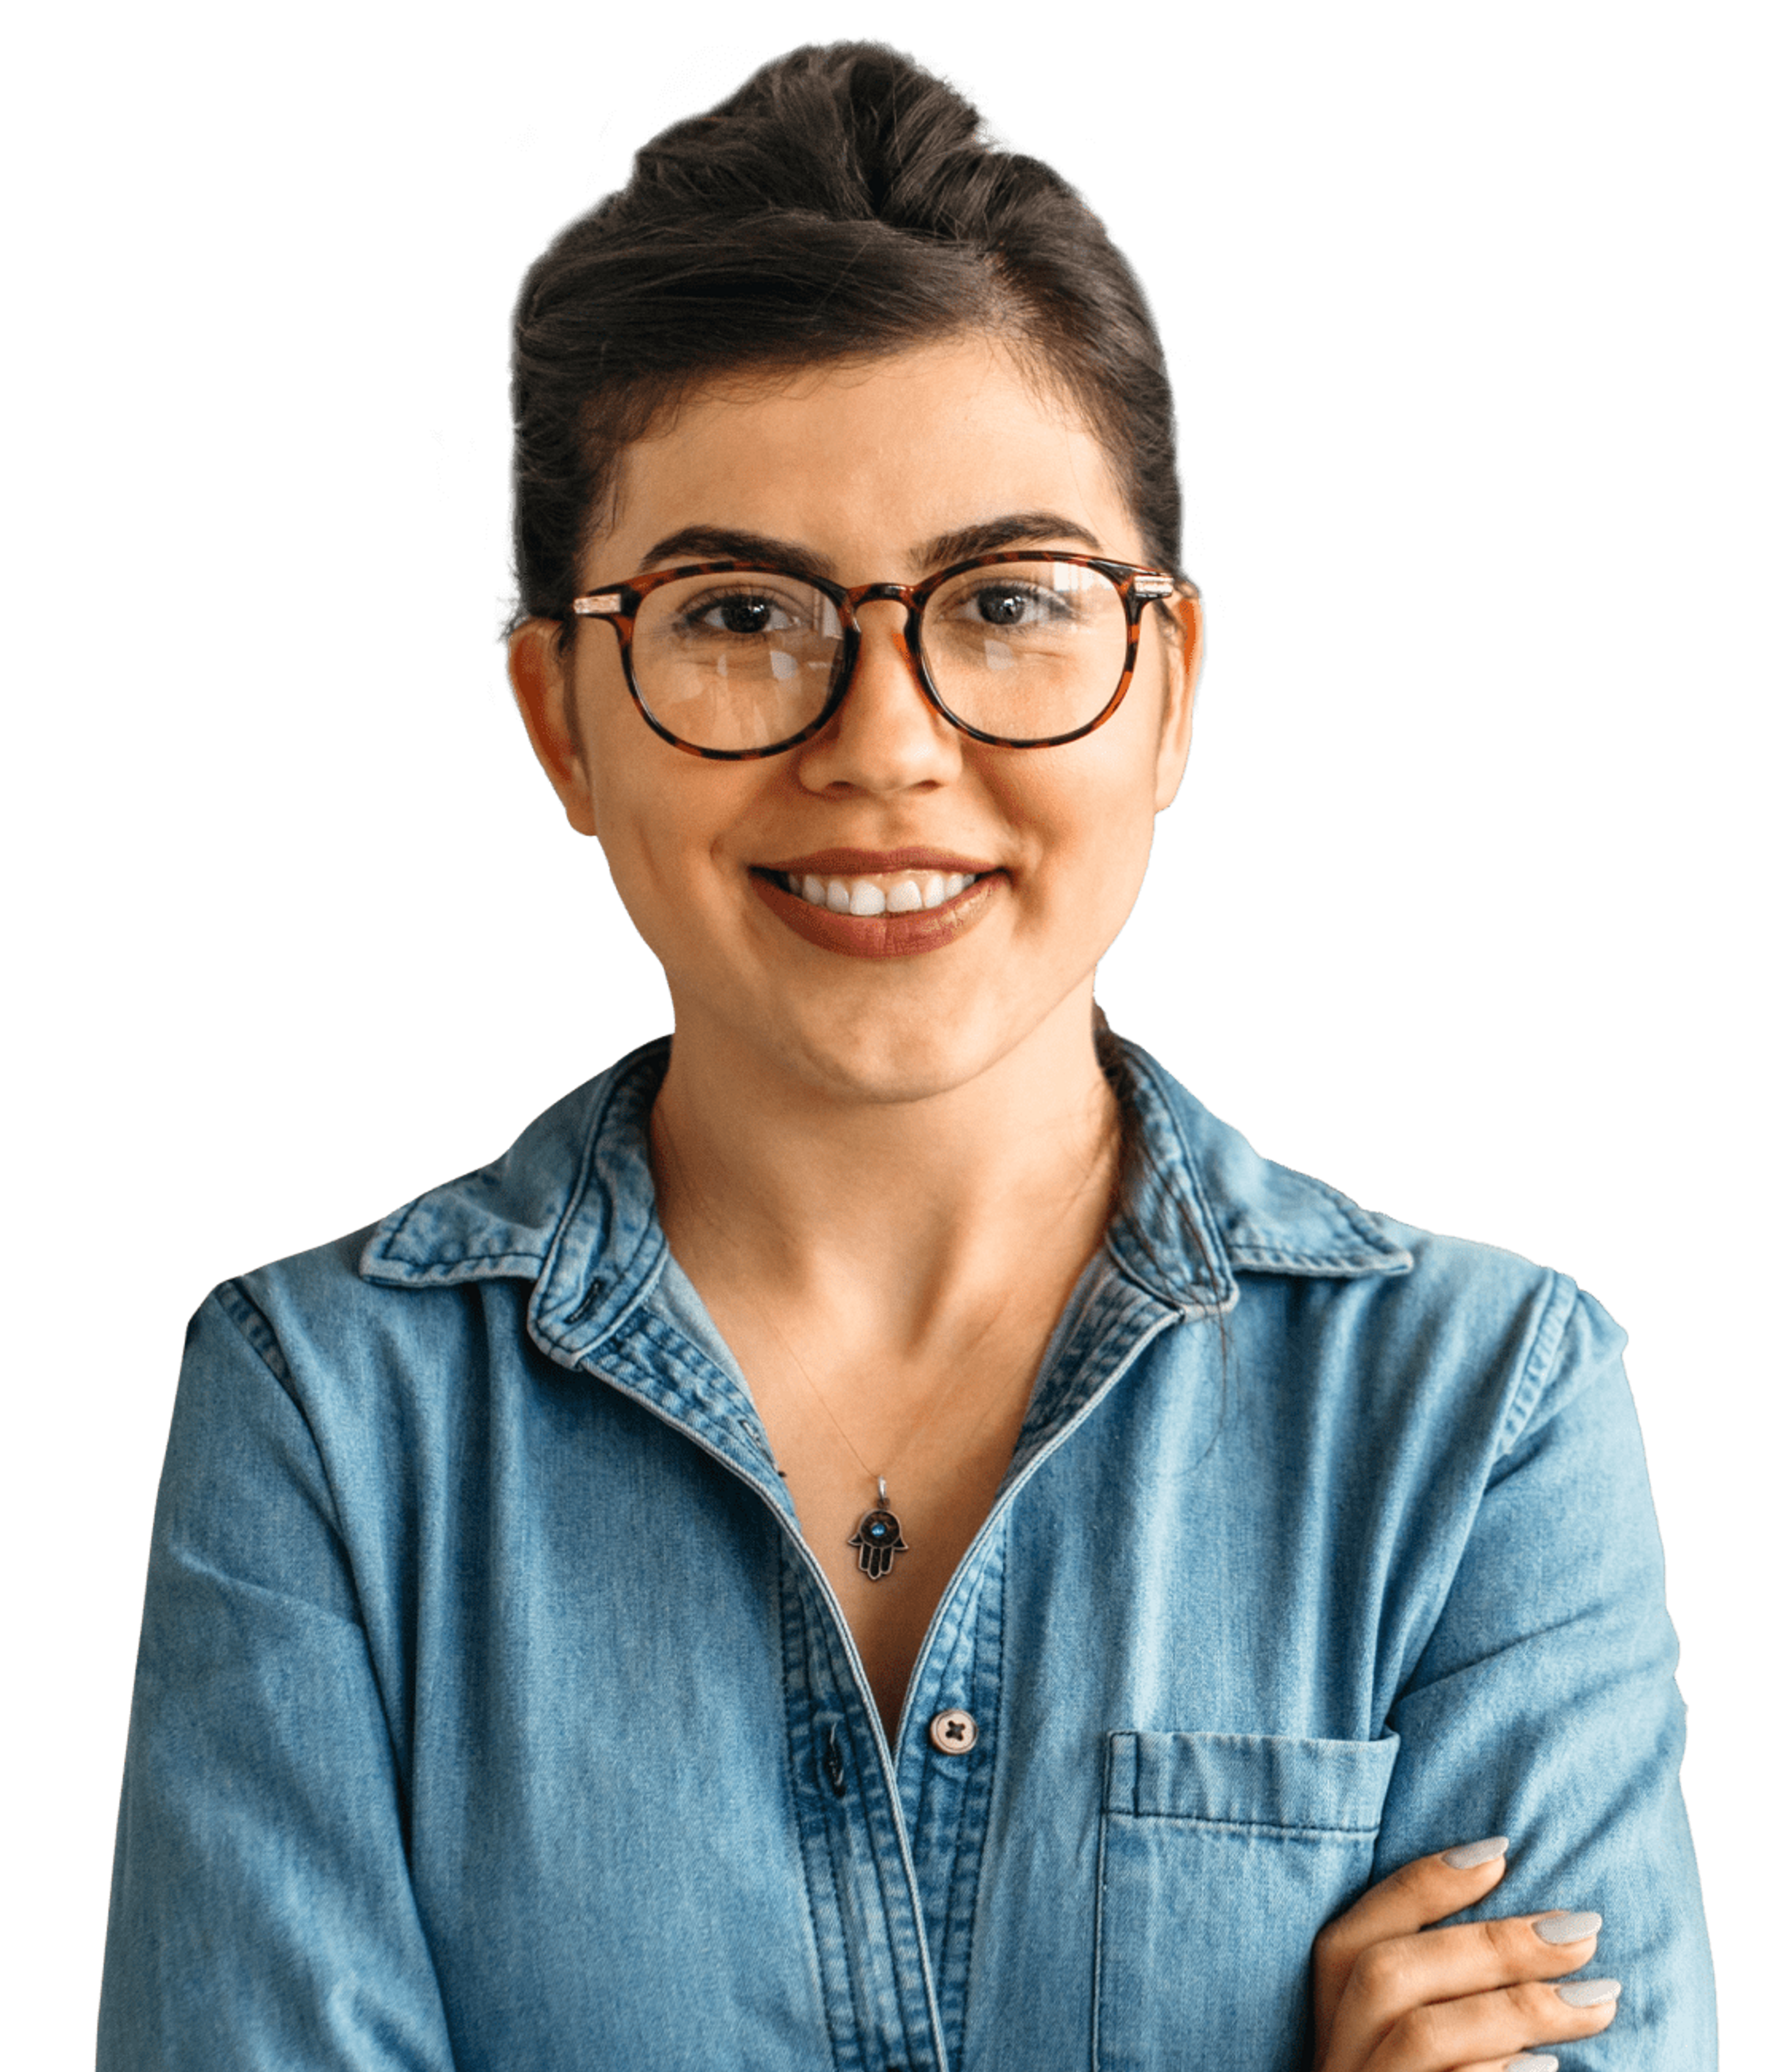 Woman wearing glasses and denim shirt. Arms folded, smiling at camera.